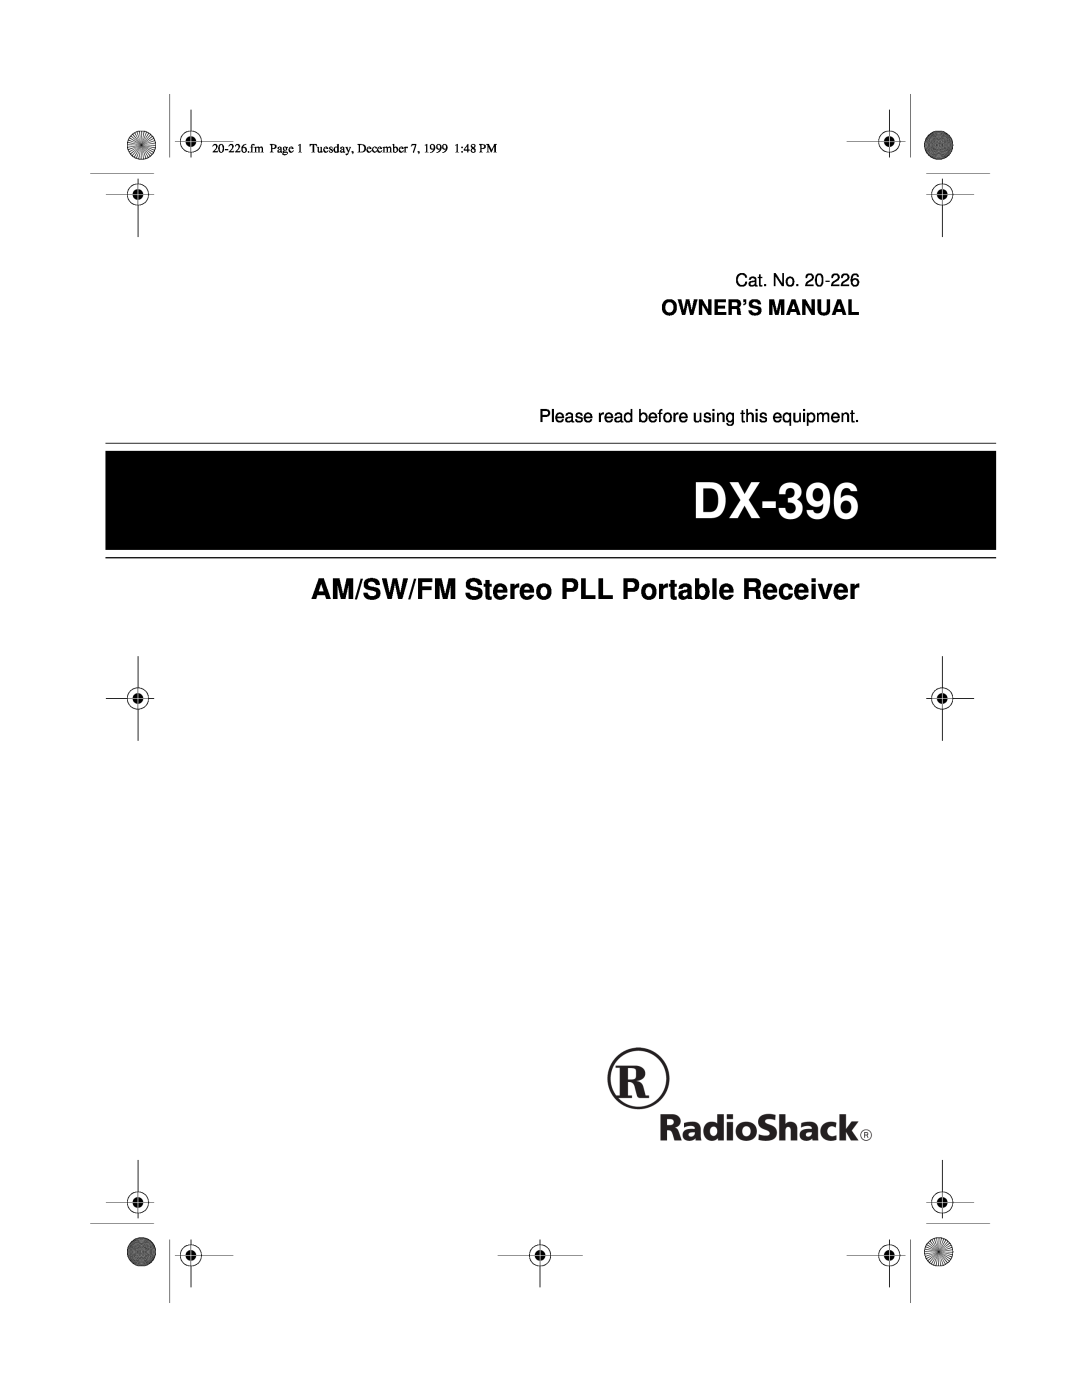 Radio Shack DX-396 owner manual AM/SW/FM Stereo PLL Portable Receiver, Owner’S Manual 